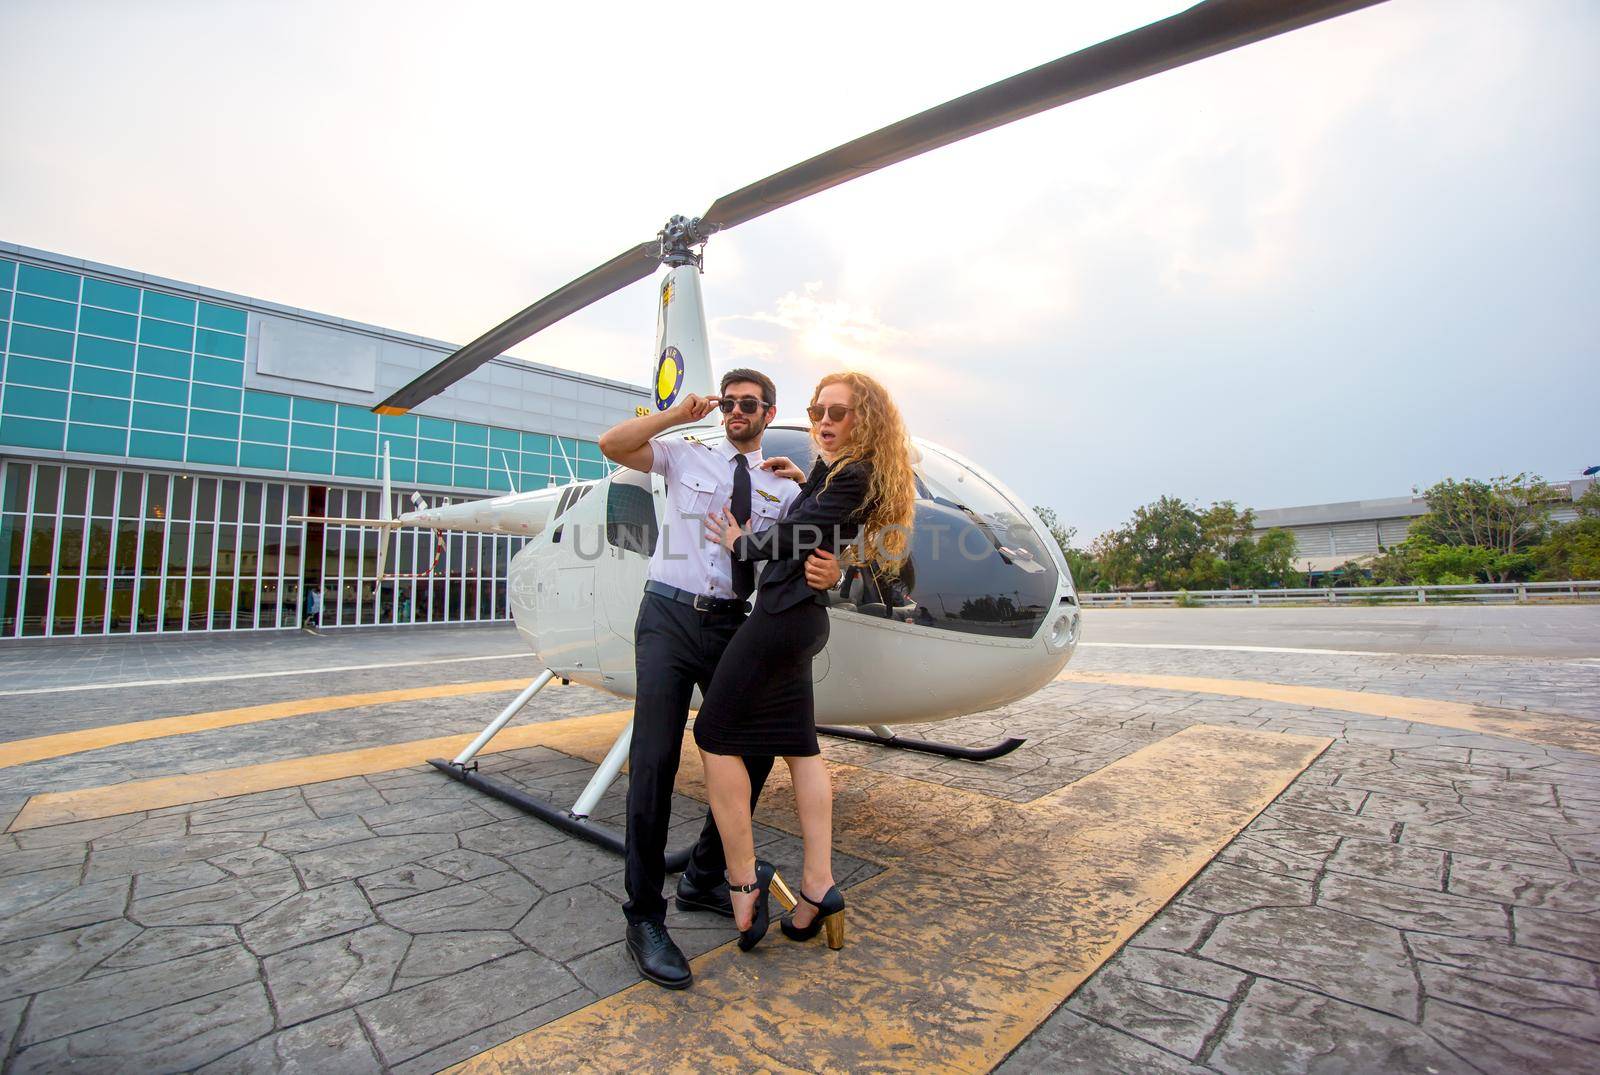 Business people traveling by helicopter , Shot of a mature businessman using a headset while traveling in a helicopter by chuanchai